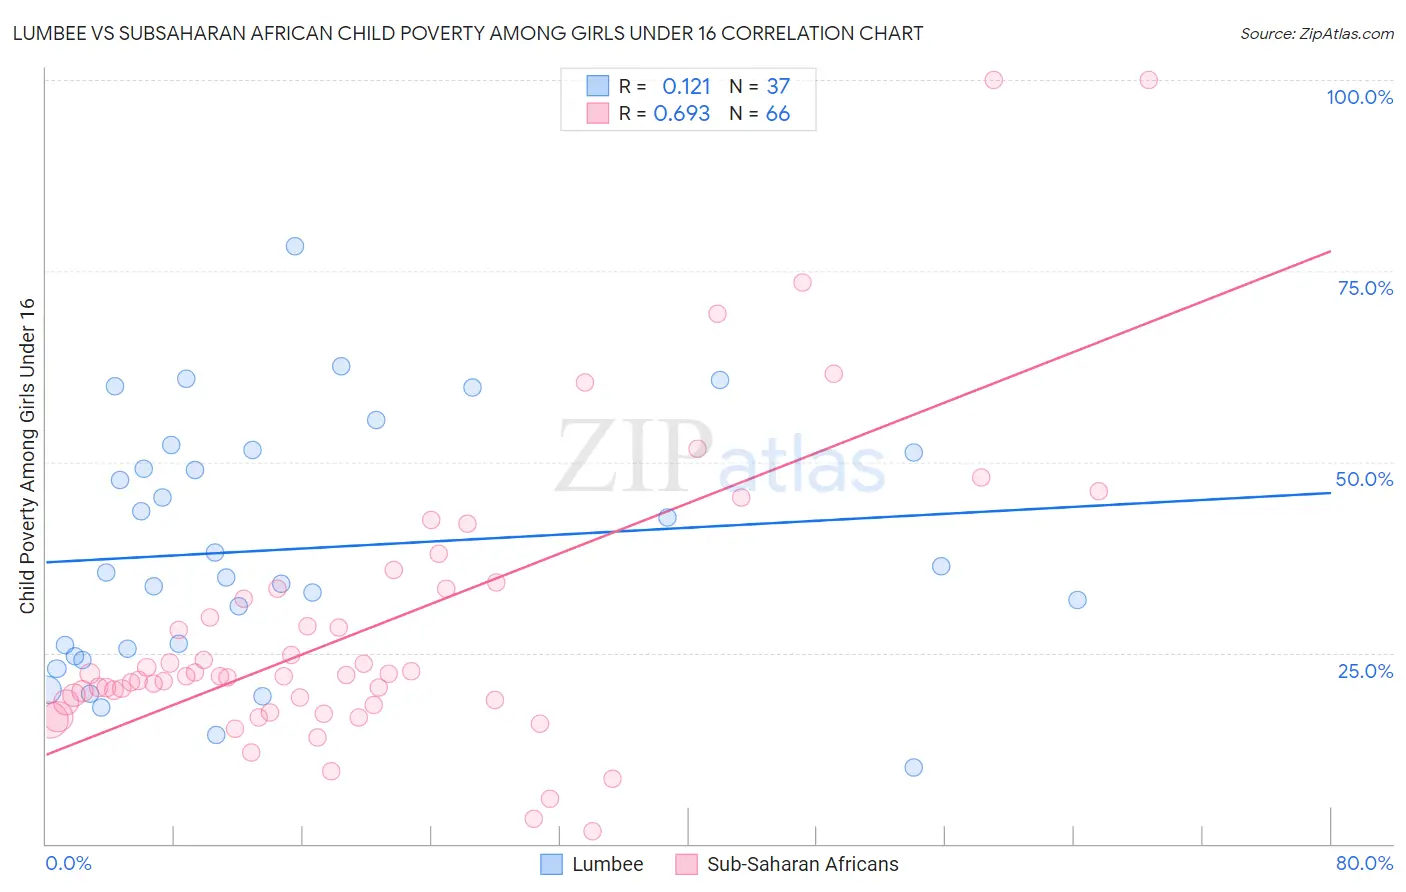 Lumbee vs Subsaharan African Child Poverty Among Girls Under 16